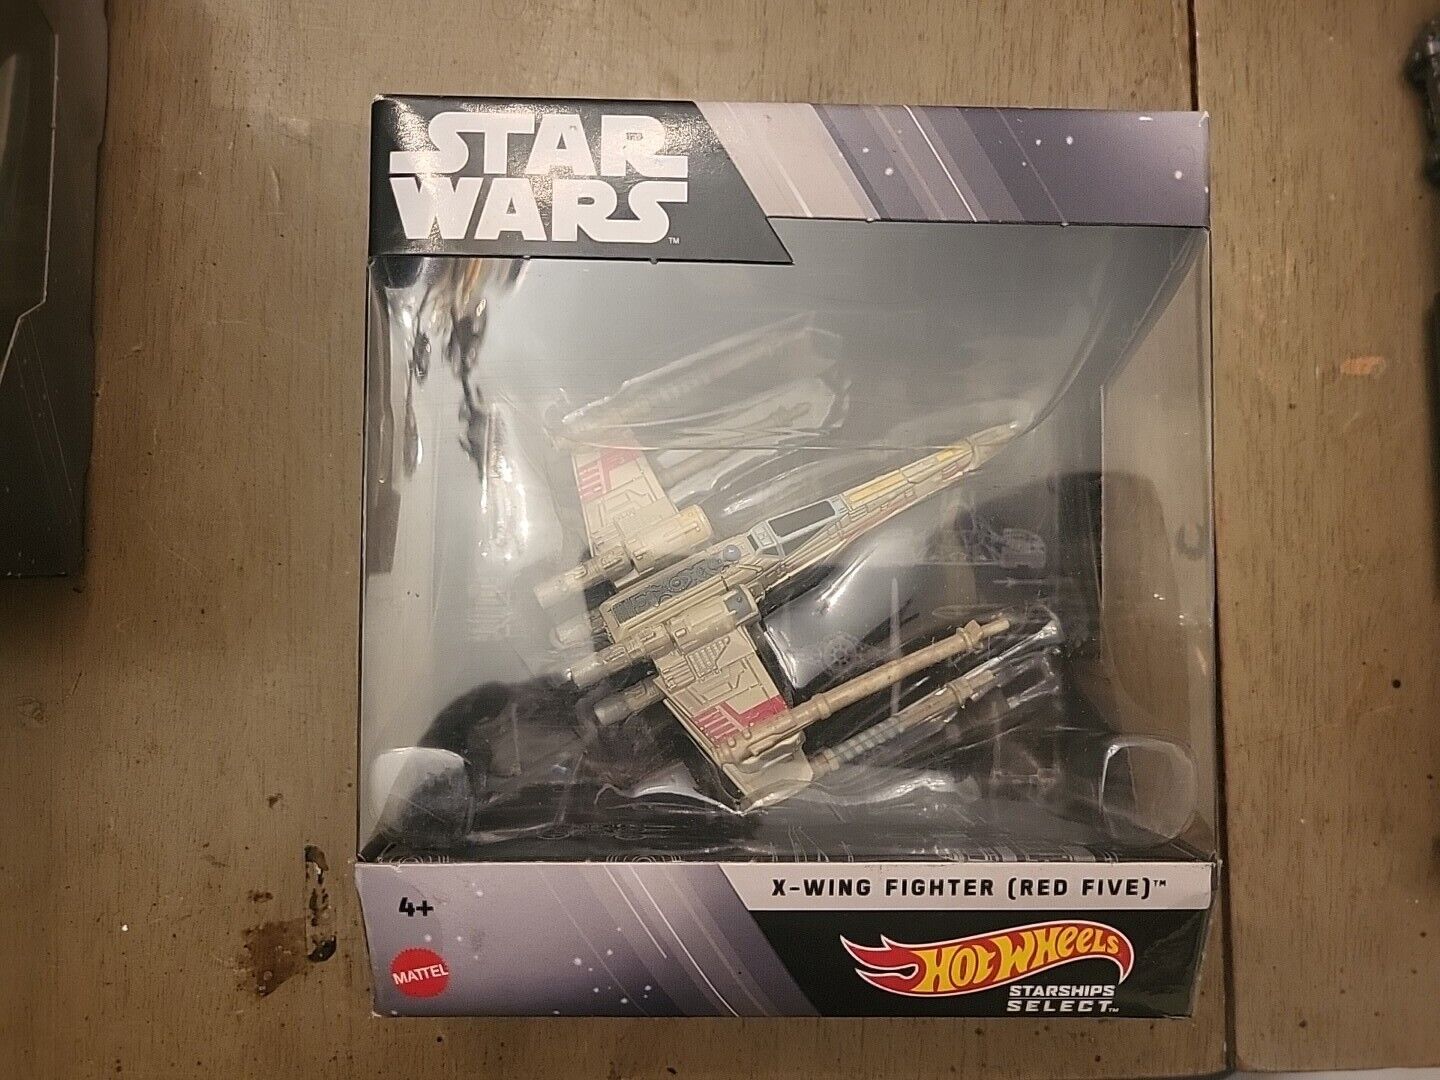 Star Wars X-Wing Red Five Hotwheels Starship Select In Original Box  1:50 Scale